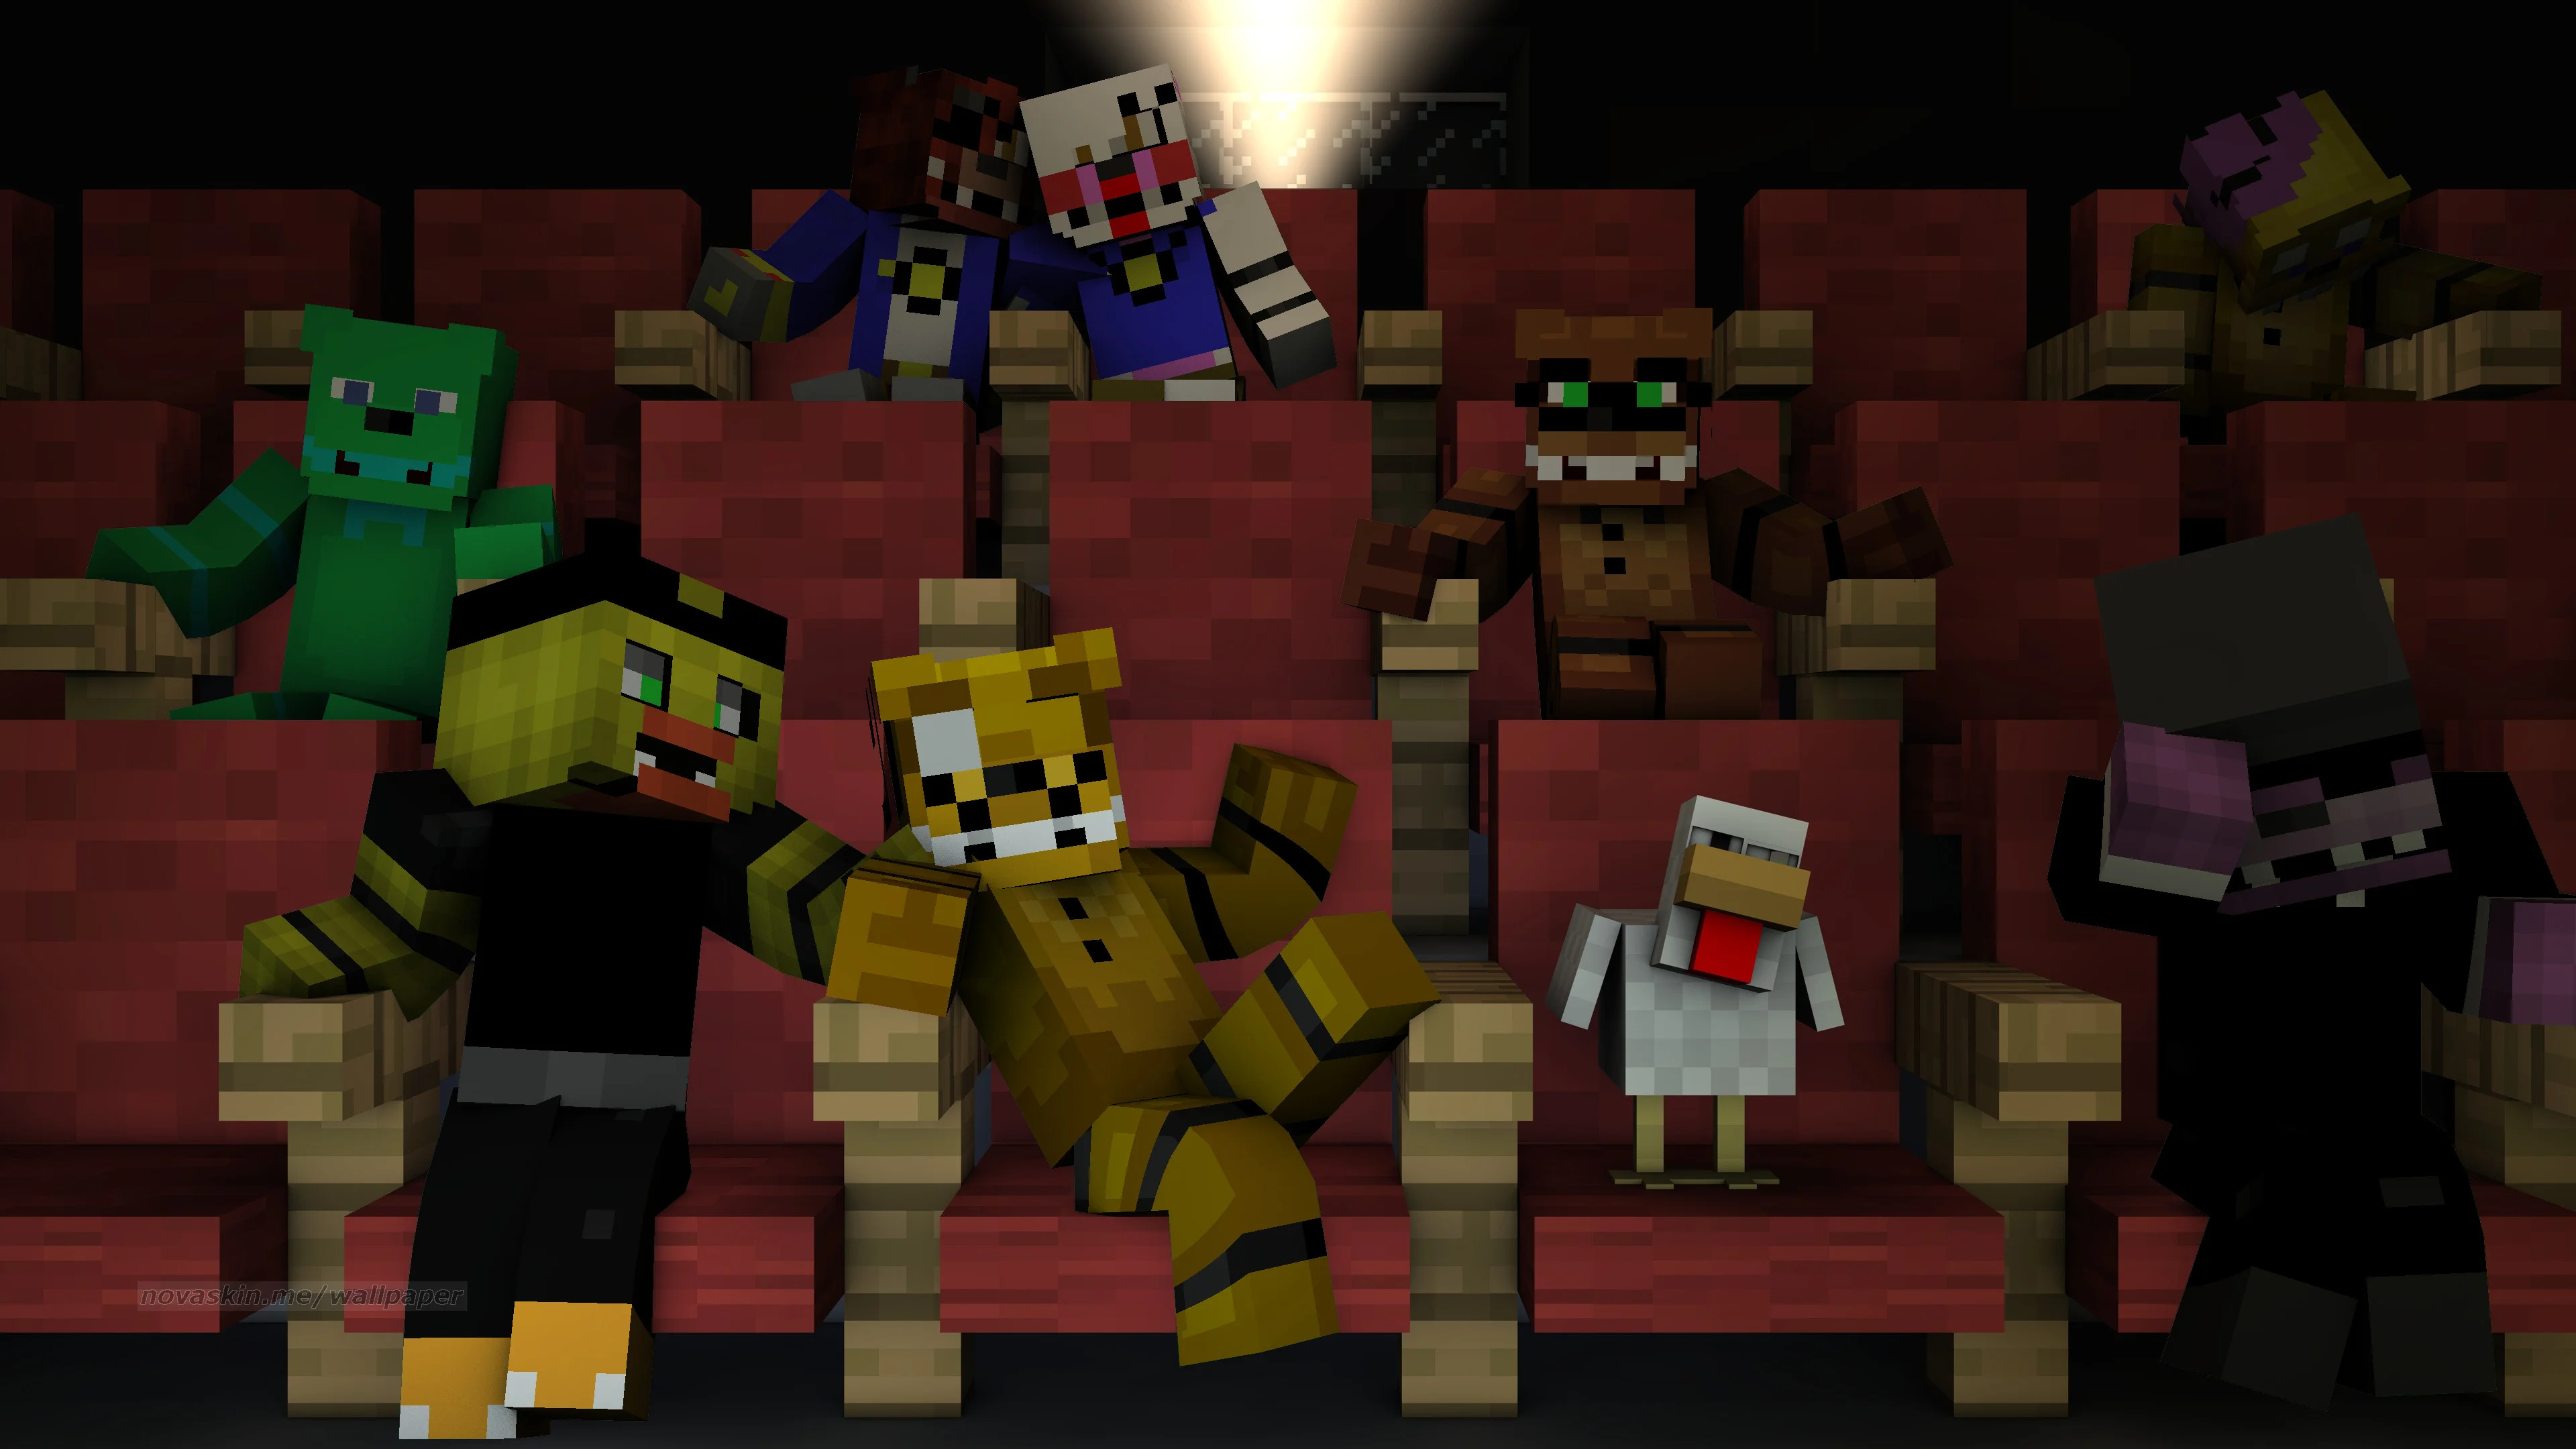 Filename: minecraft_theater_gift_wallpaper_by_foxymanmaster1987-d9jzb1y.png